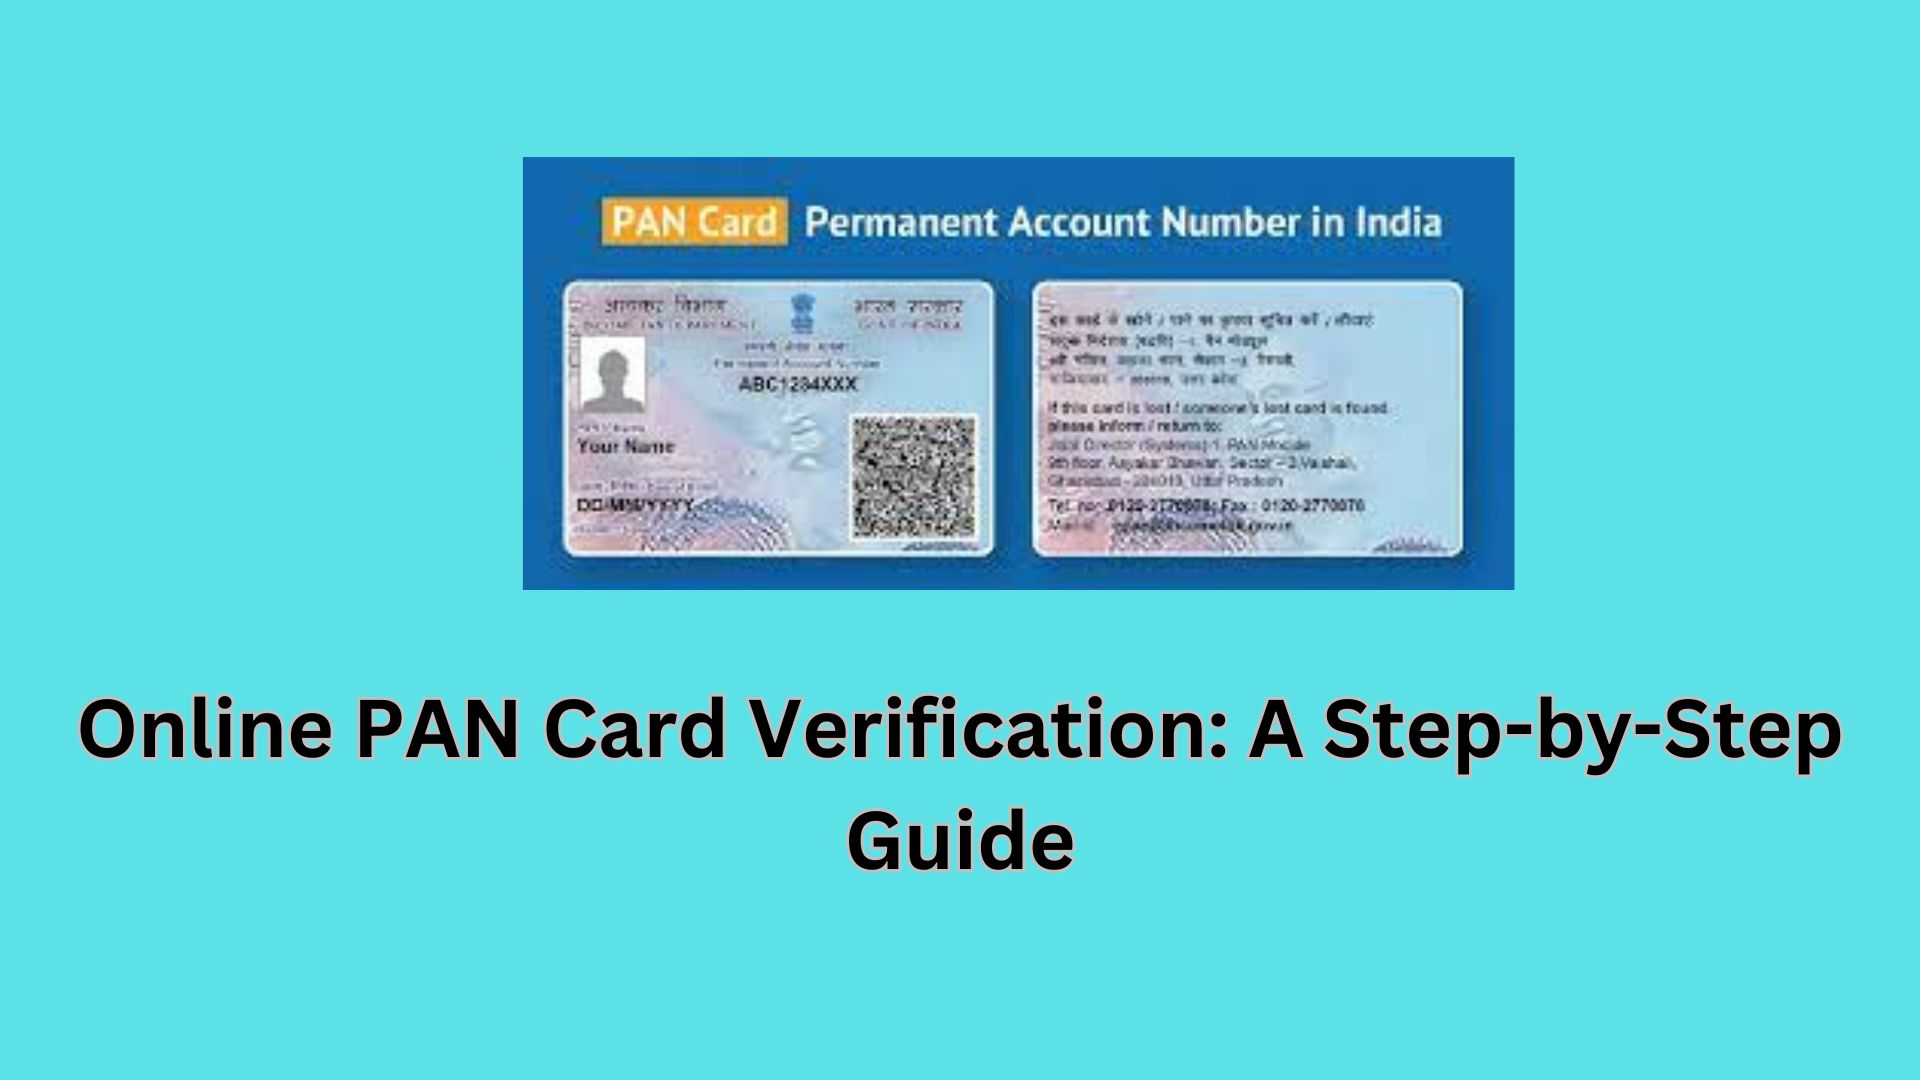 Online PAN Card Verification: A Step-by-Step Guide